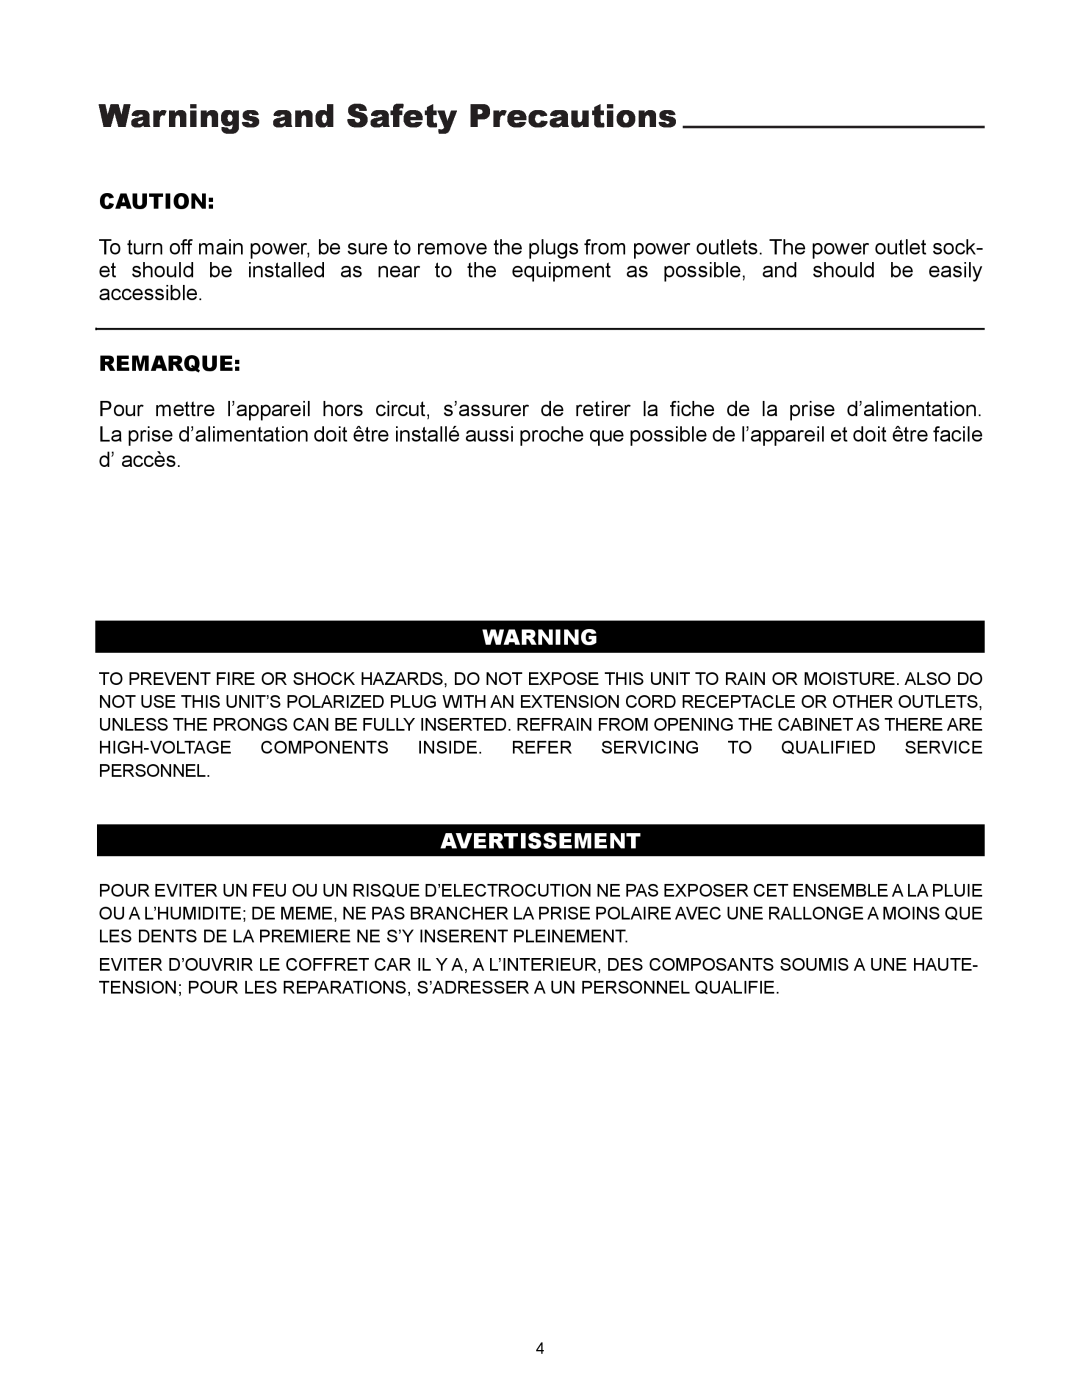 Runco DLC-2000HD user manual Warnings and Safety Precautions, Remarque, Avertissement 